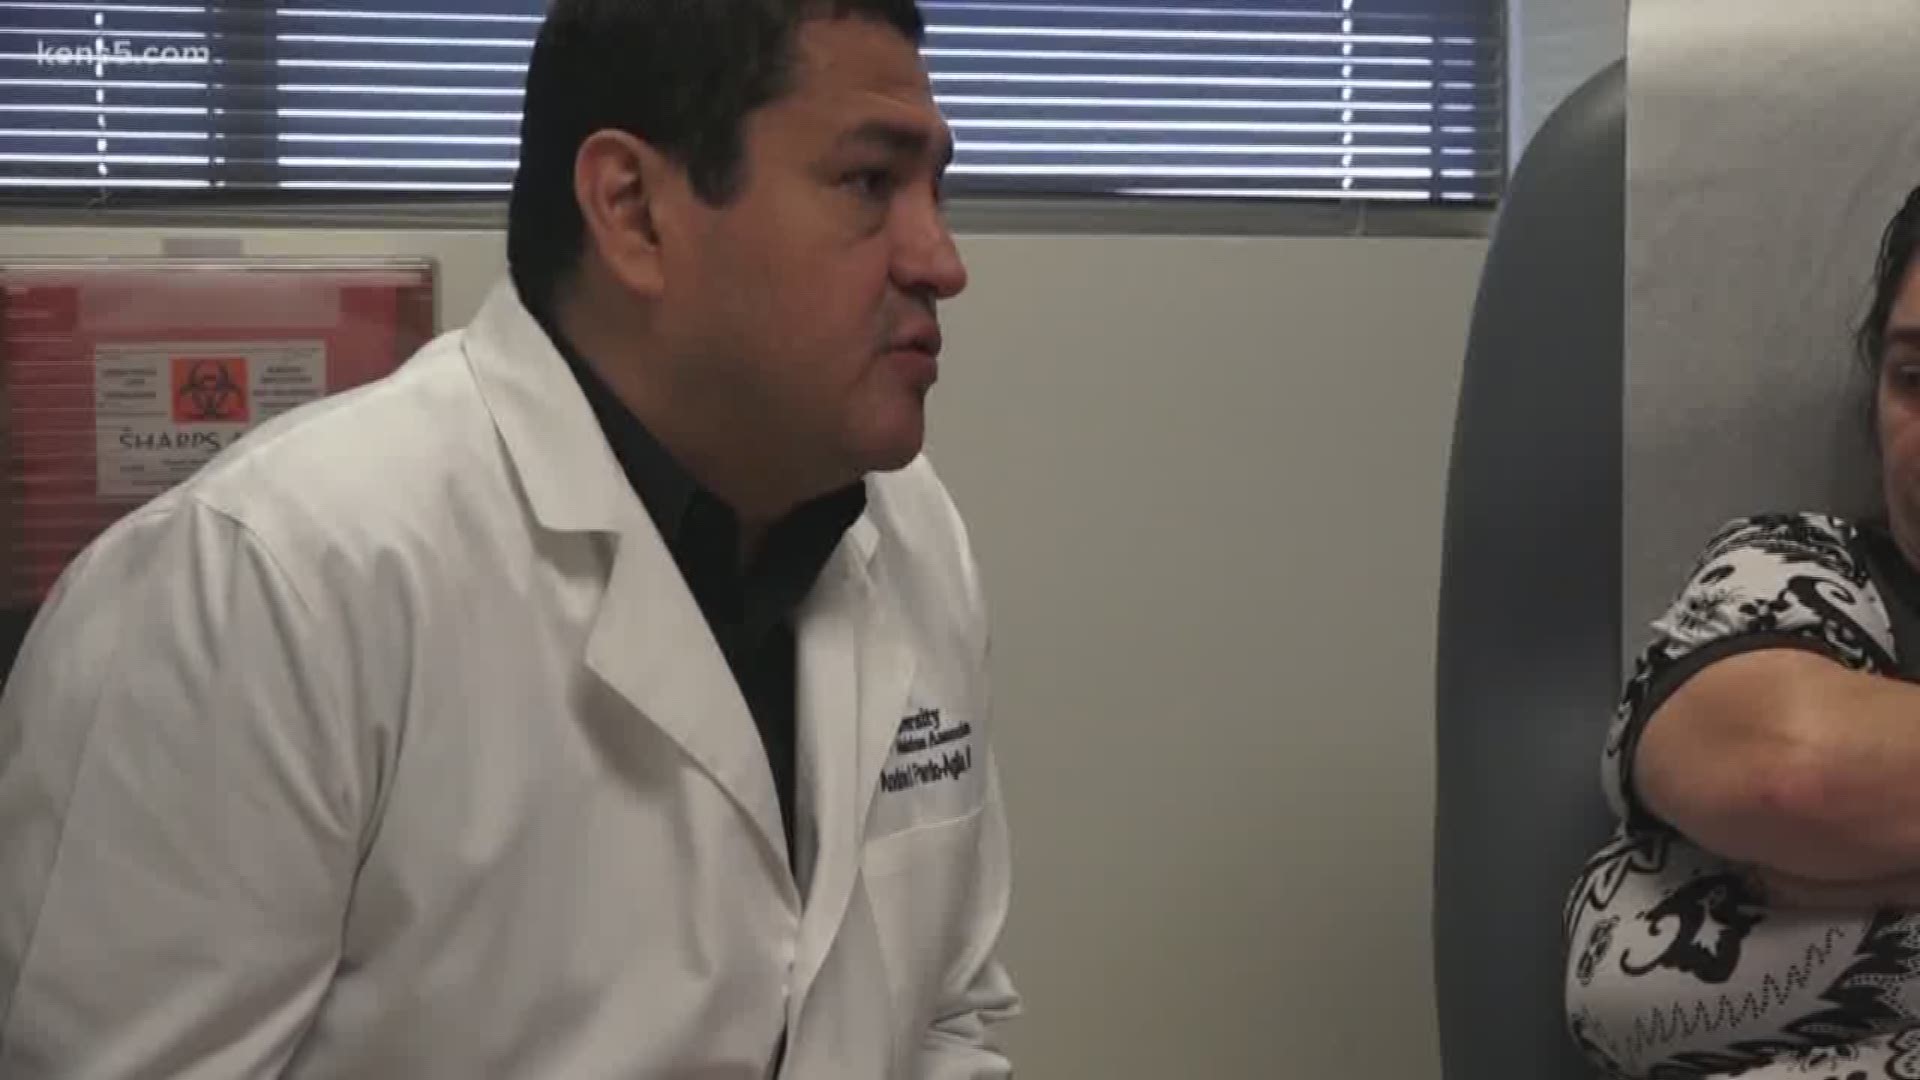 Visiting your doctor can lead to a confusing, even intimidating, experience. KENS 5 Reporter Jeremy Baker found out just how much health illiteracy impacts hospital stays and healthcare costs.